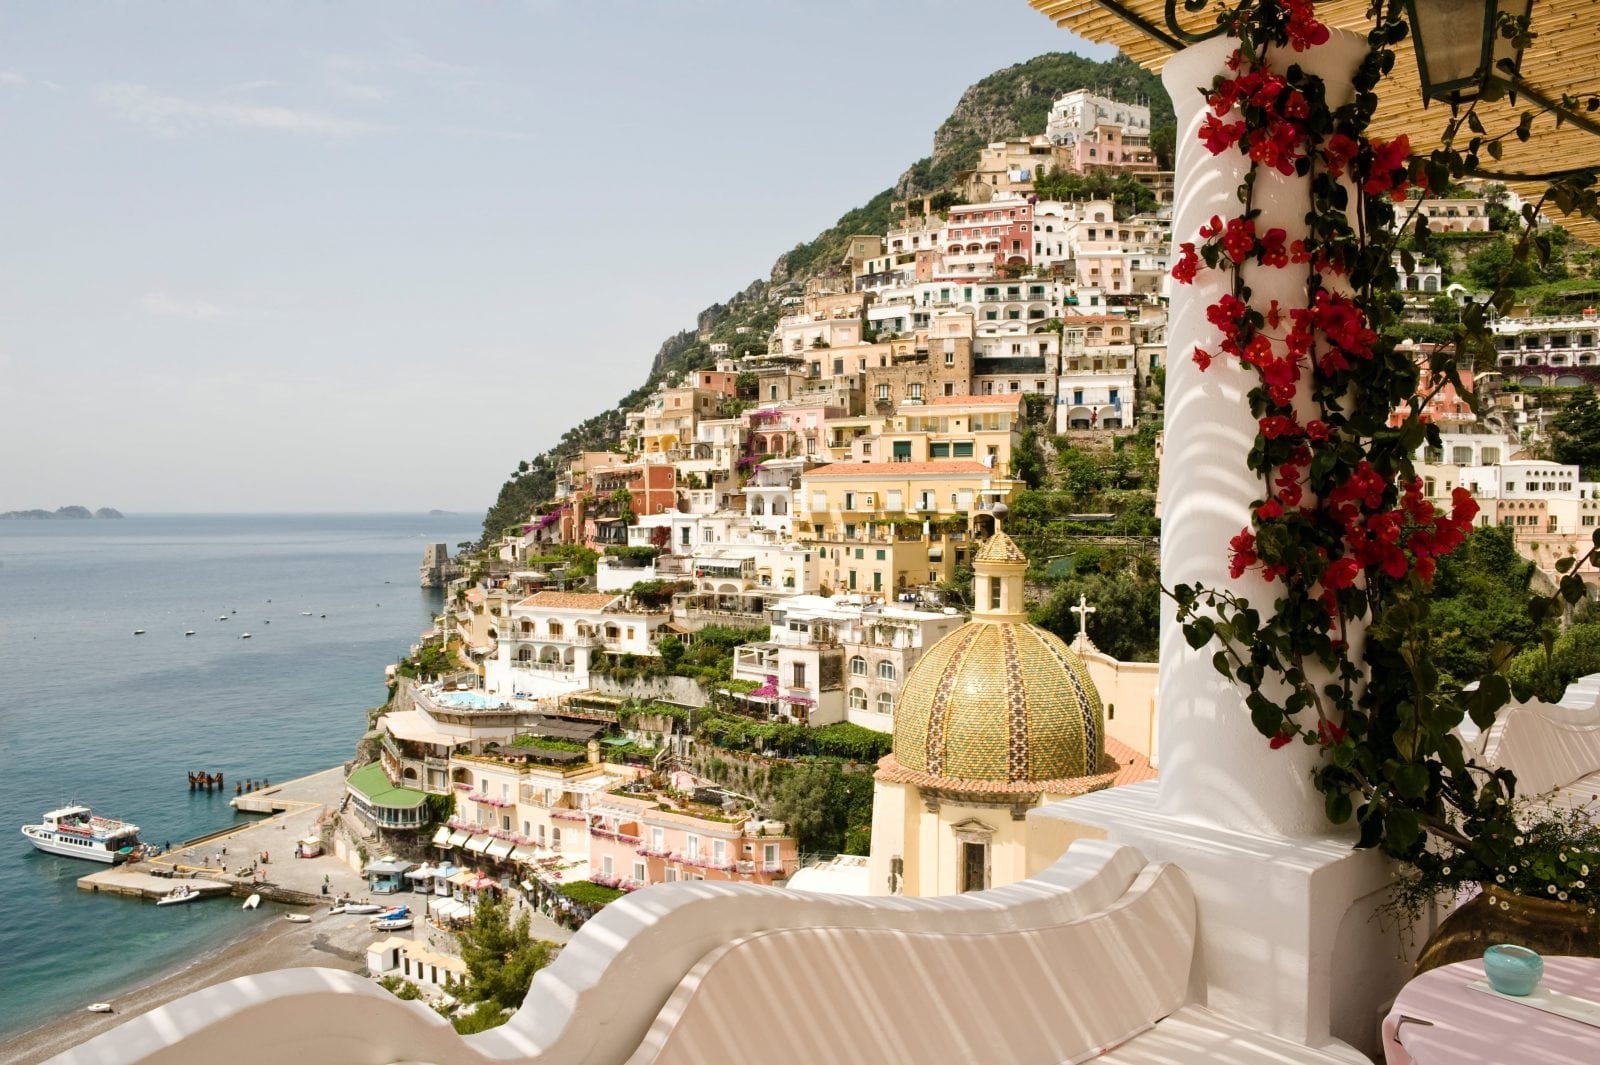 Panoramic view from the terrace of Albergo Le Sirenuse - Positano